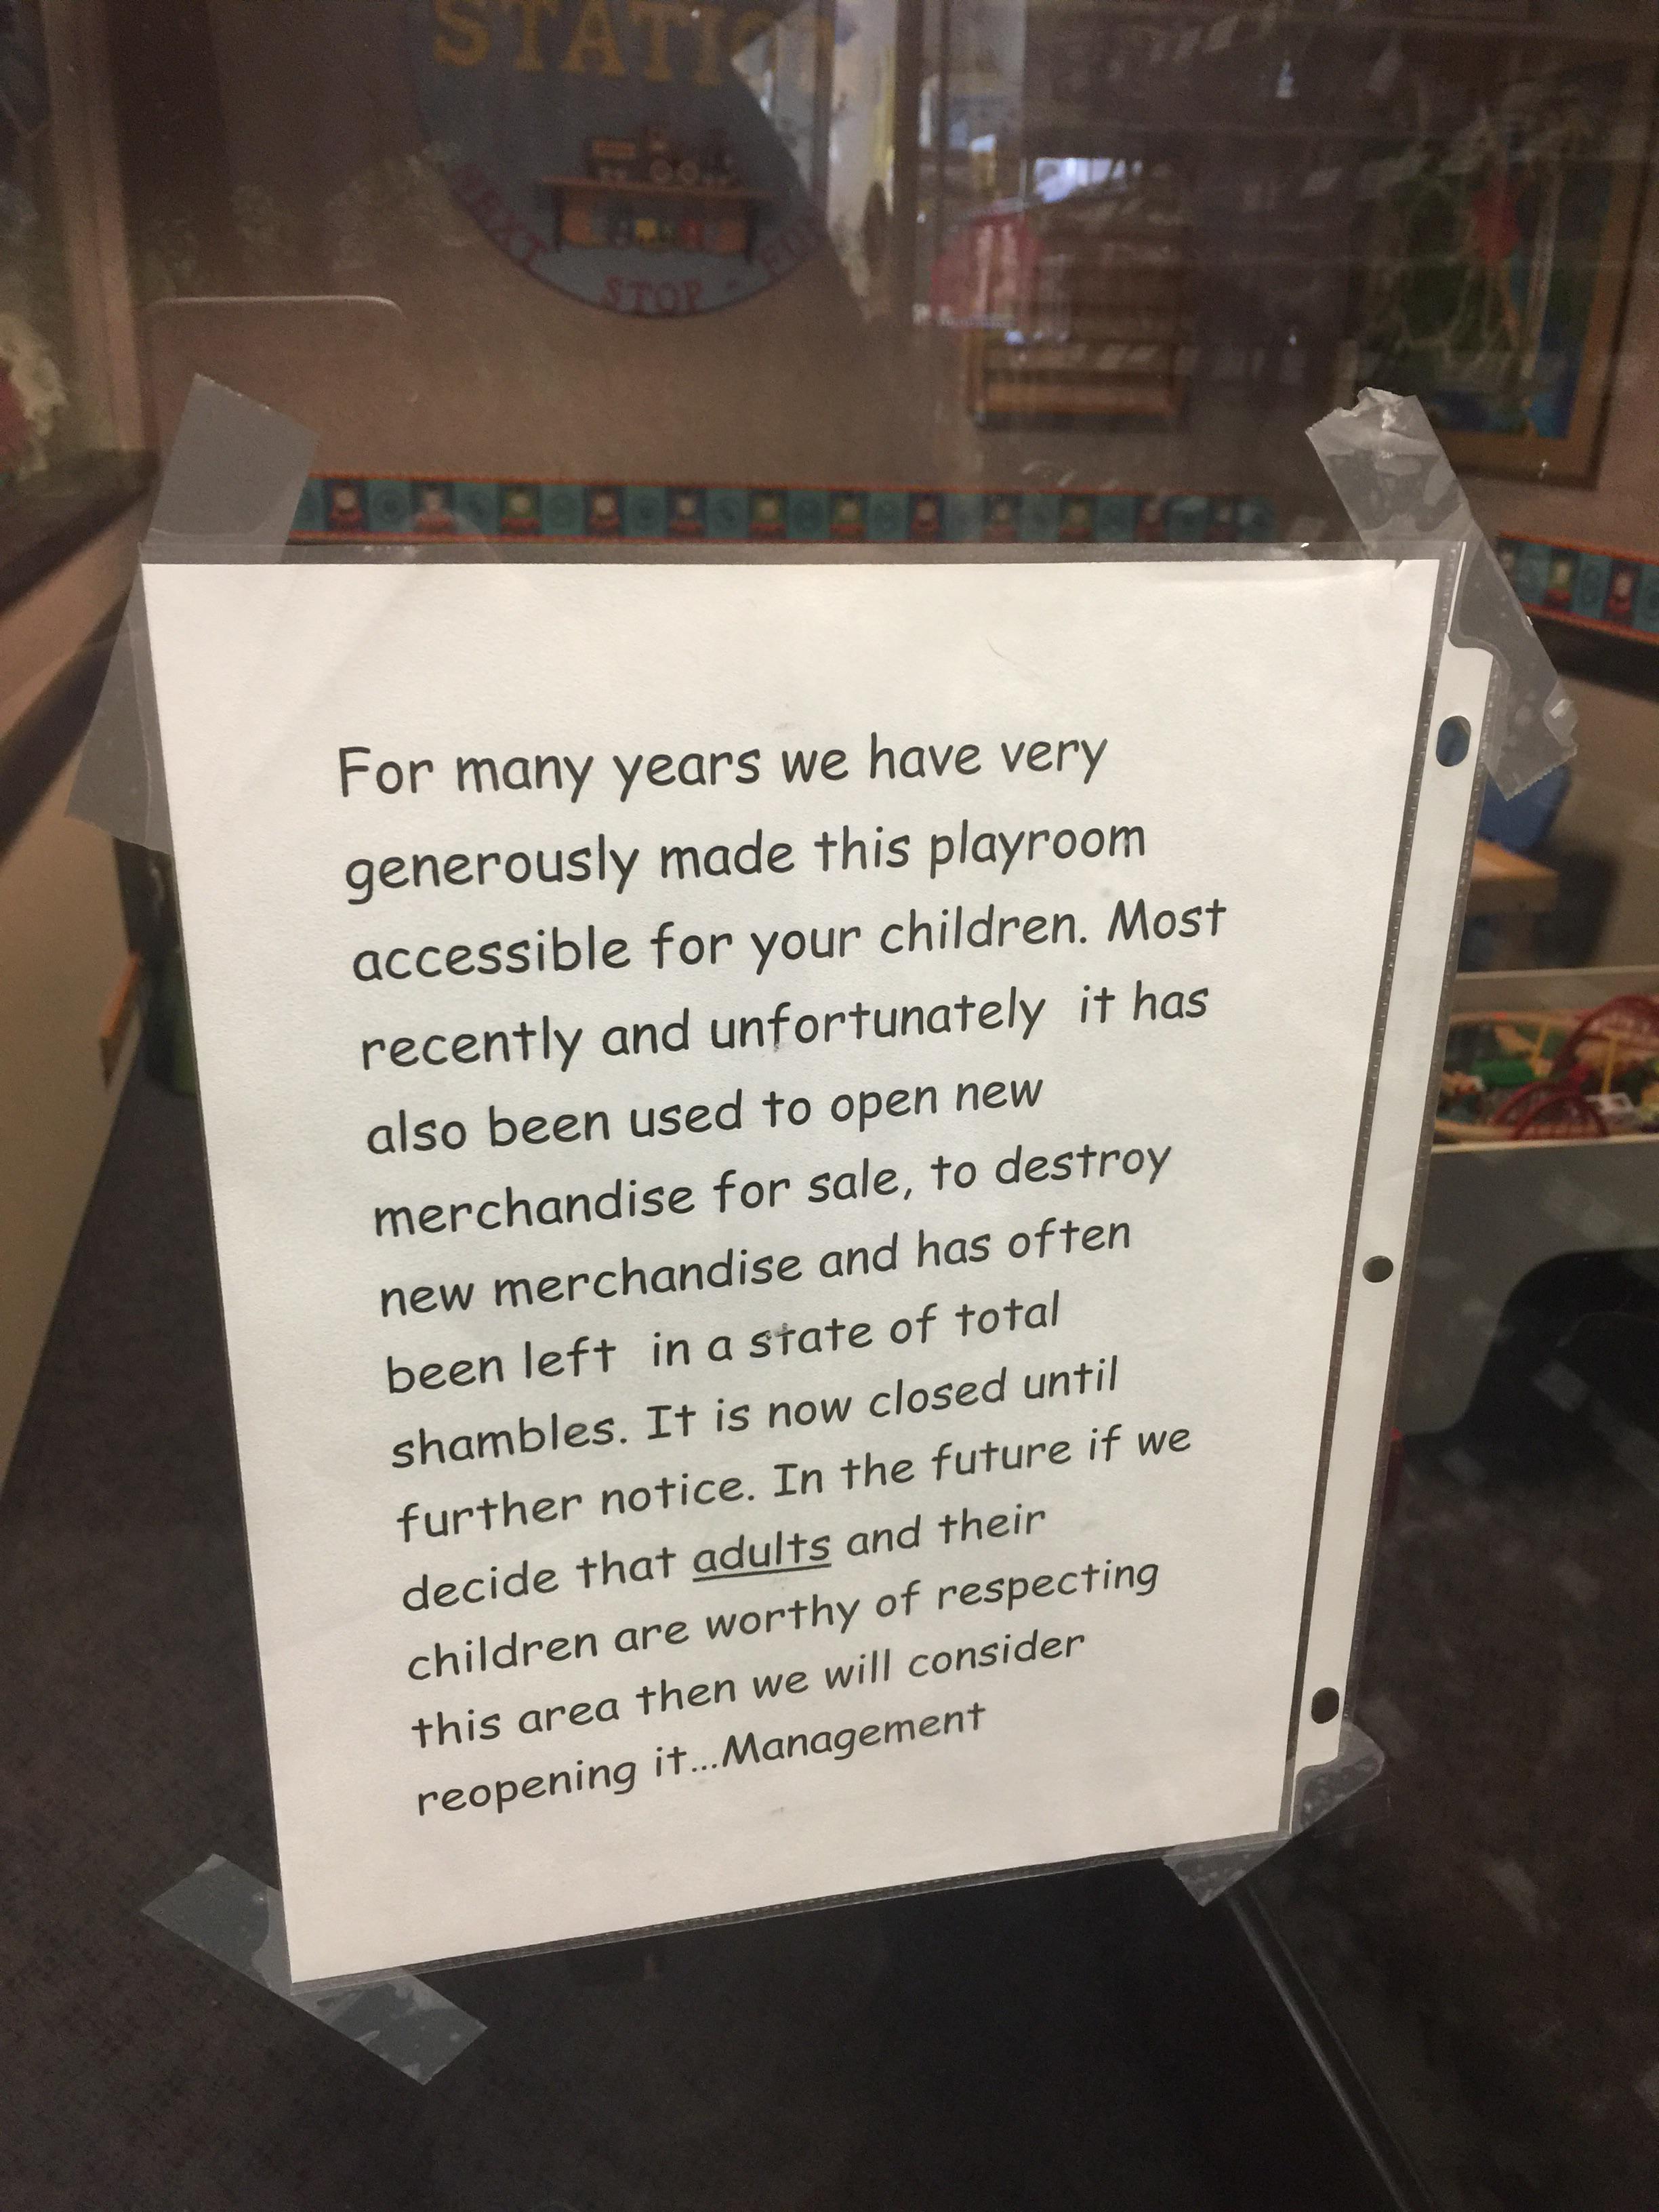 commemorative plaque - For many years we have very generously made this playroom accessible for your children. Most recently and unfortunately it has also been used to open new merchandise for sale, to destroy new merchandise and has often been left in a 